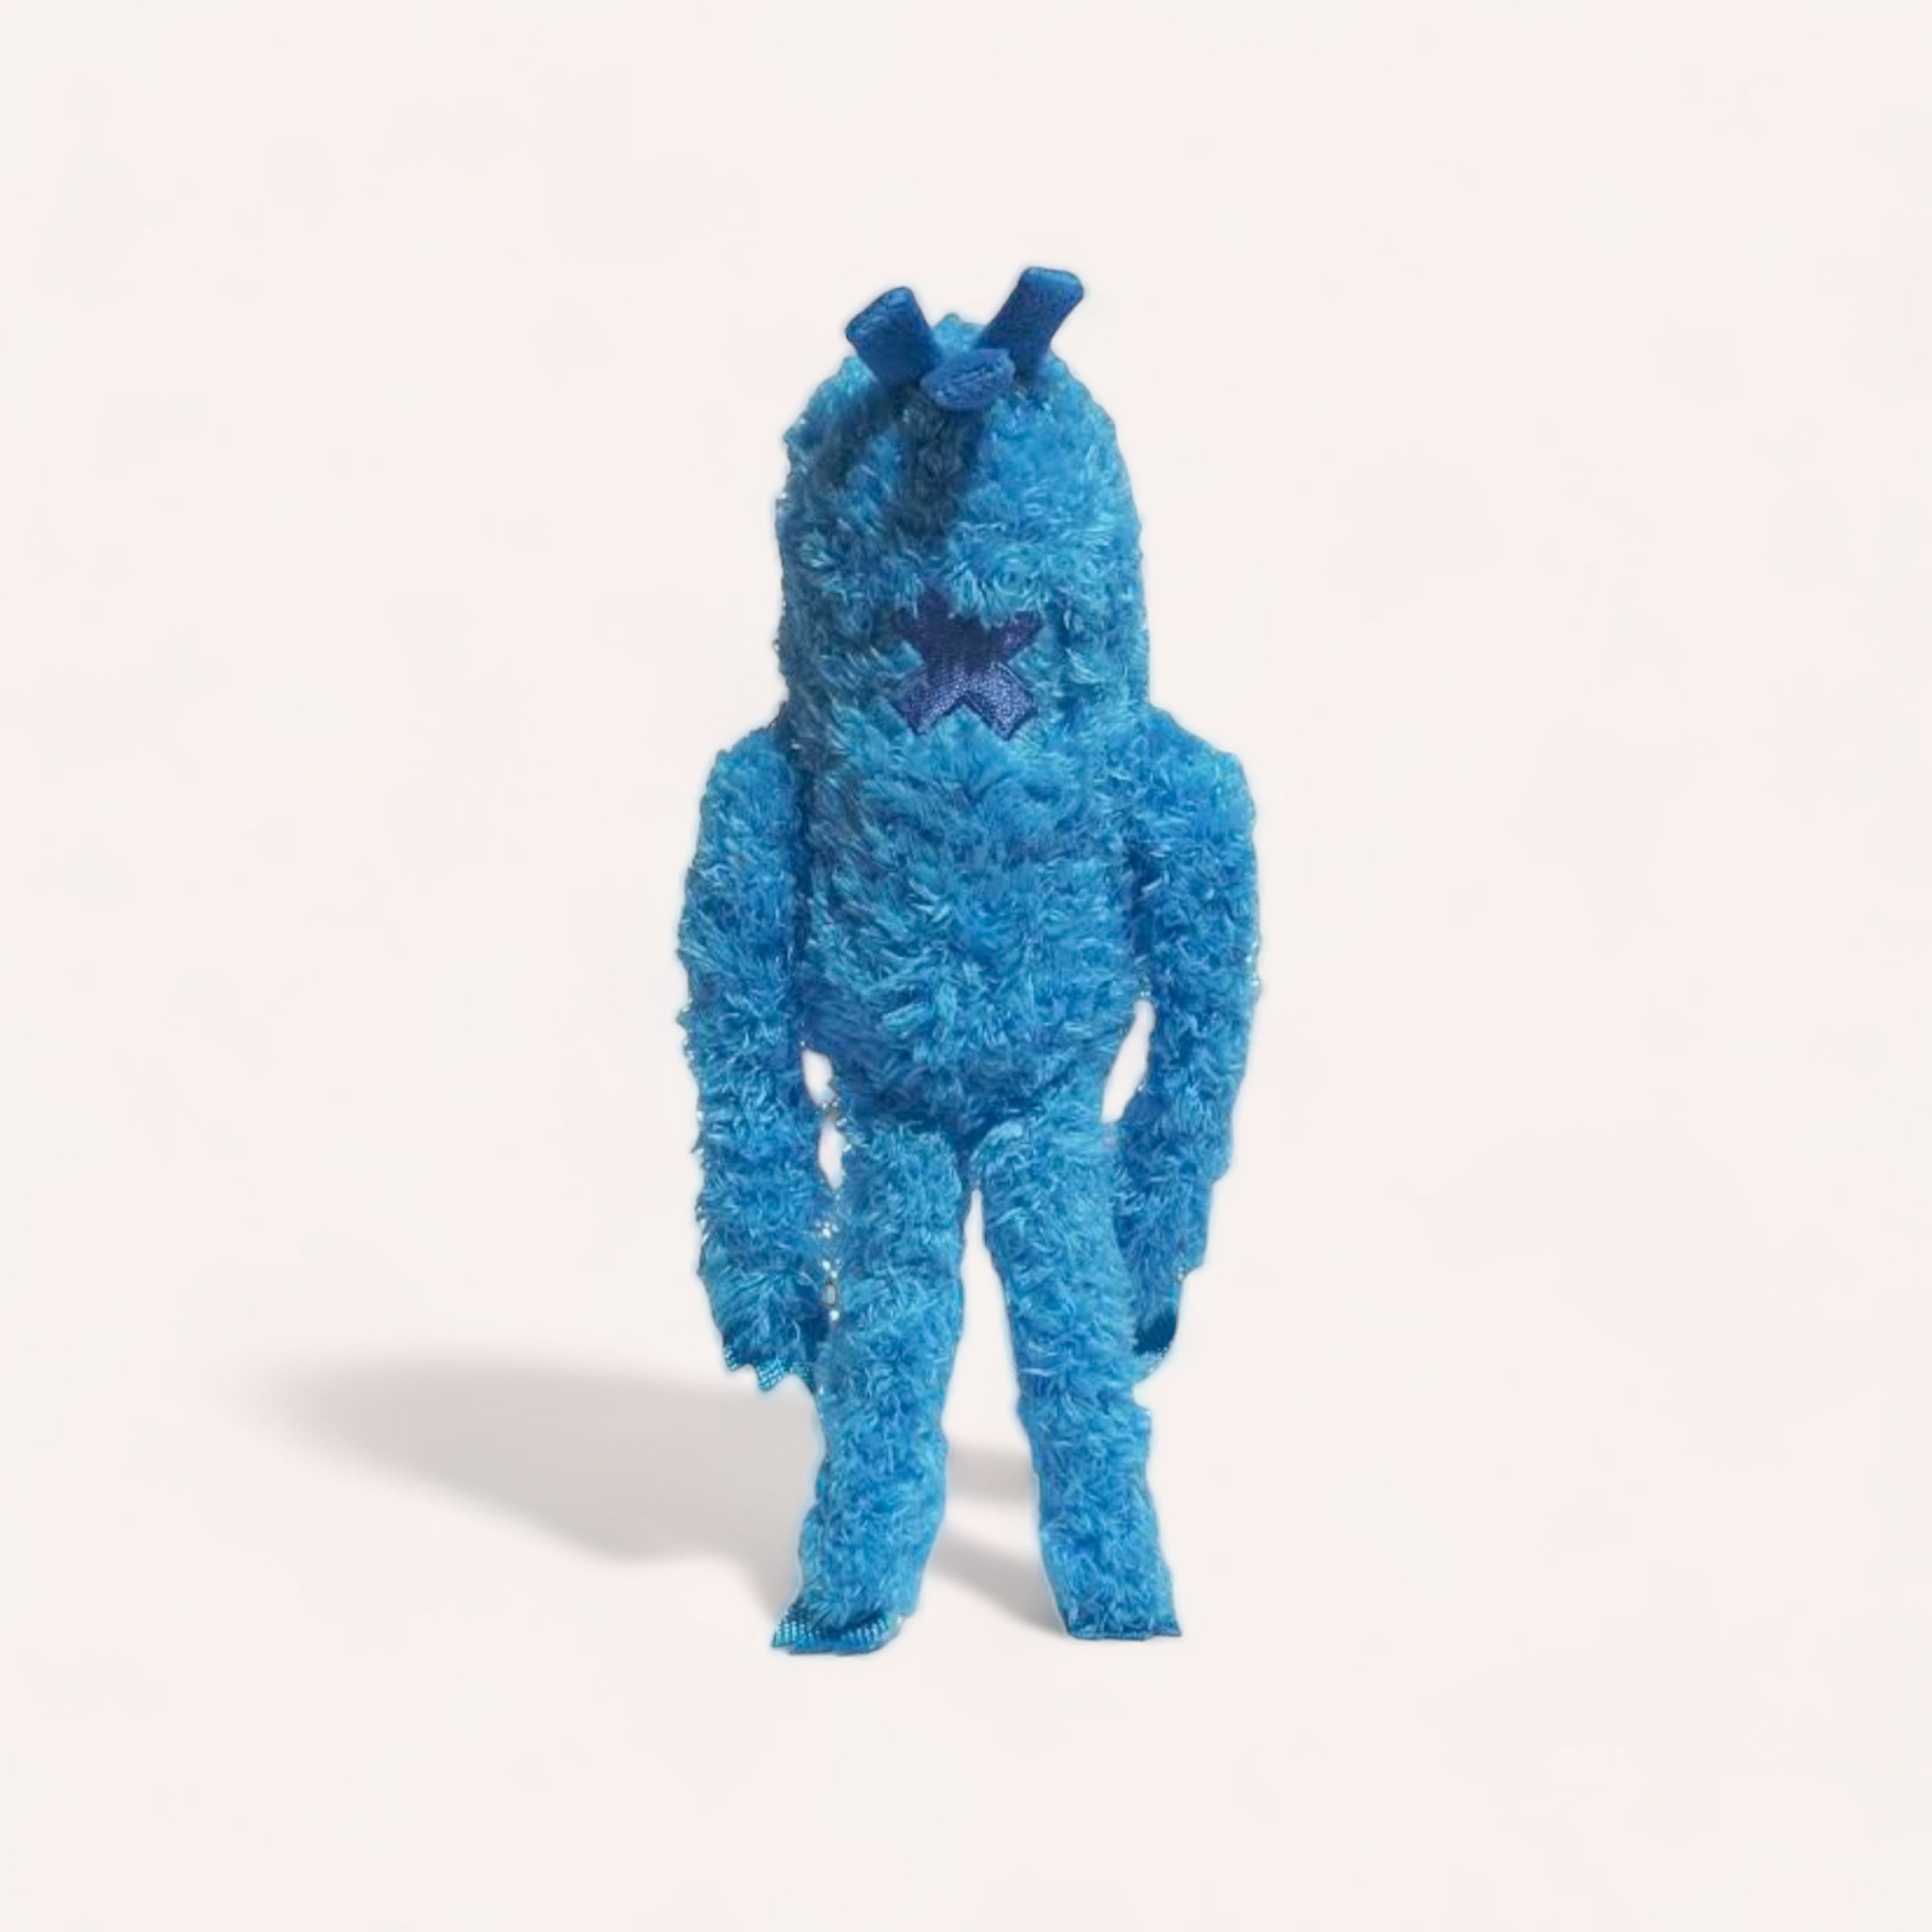 A person in a whimsical blue Blu Pet Toy by Zee.Dog plush toy costume with super soft fluffy fur and prominent eyes, standing against a white background.